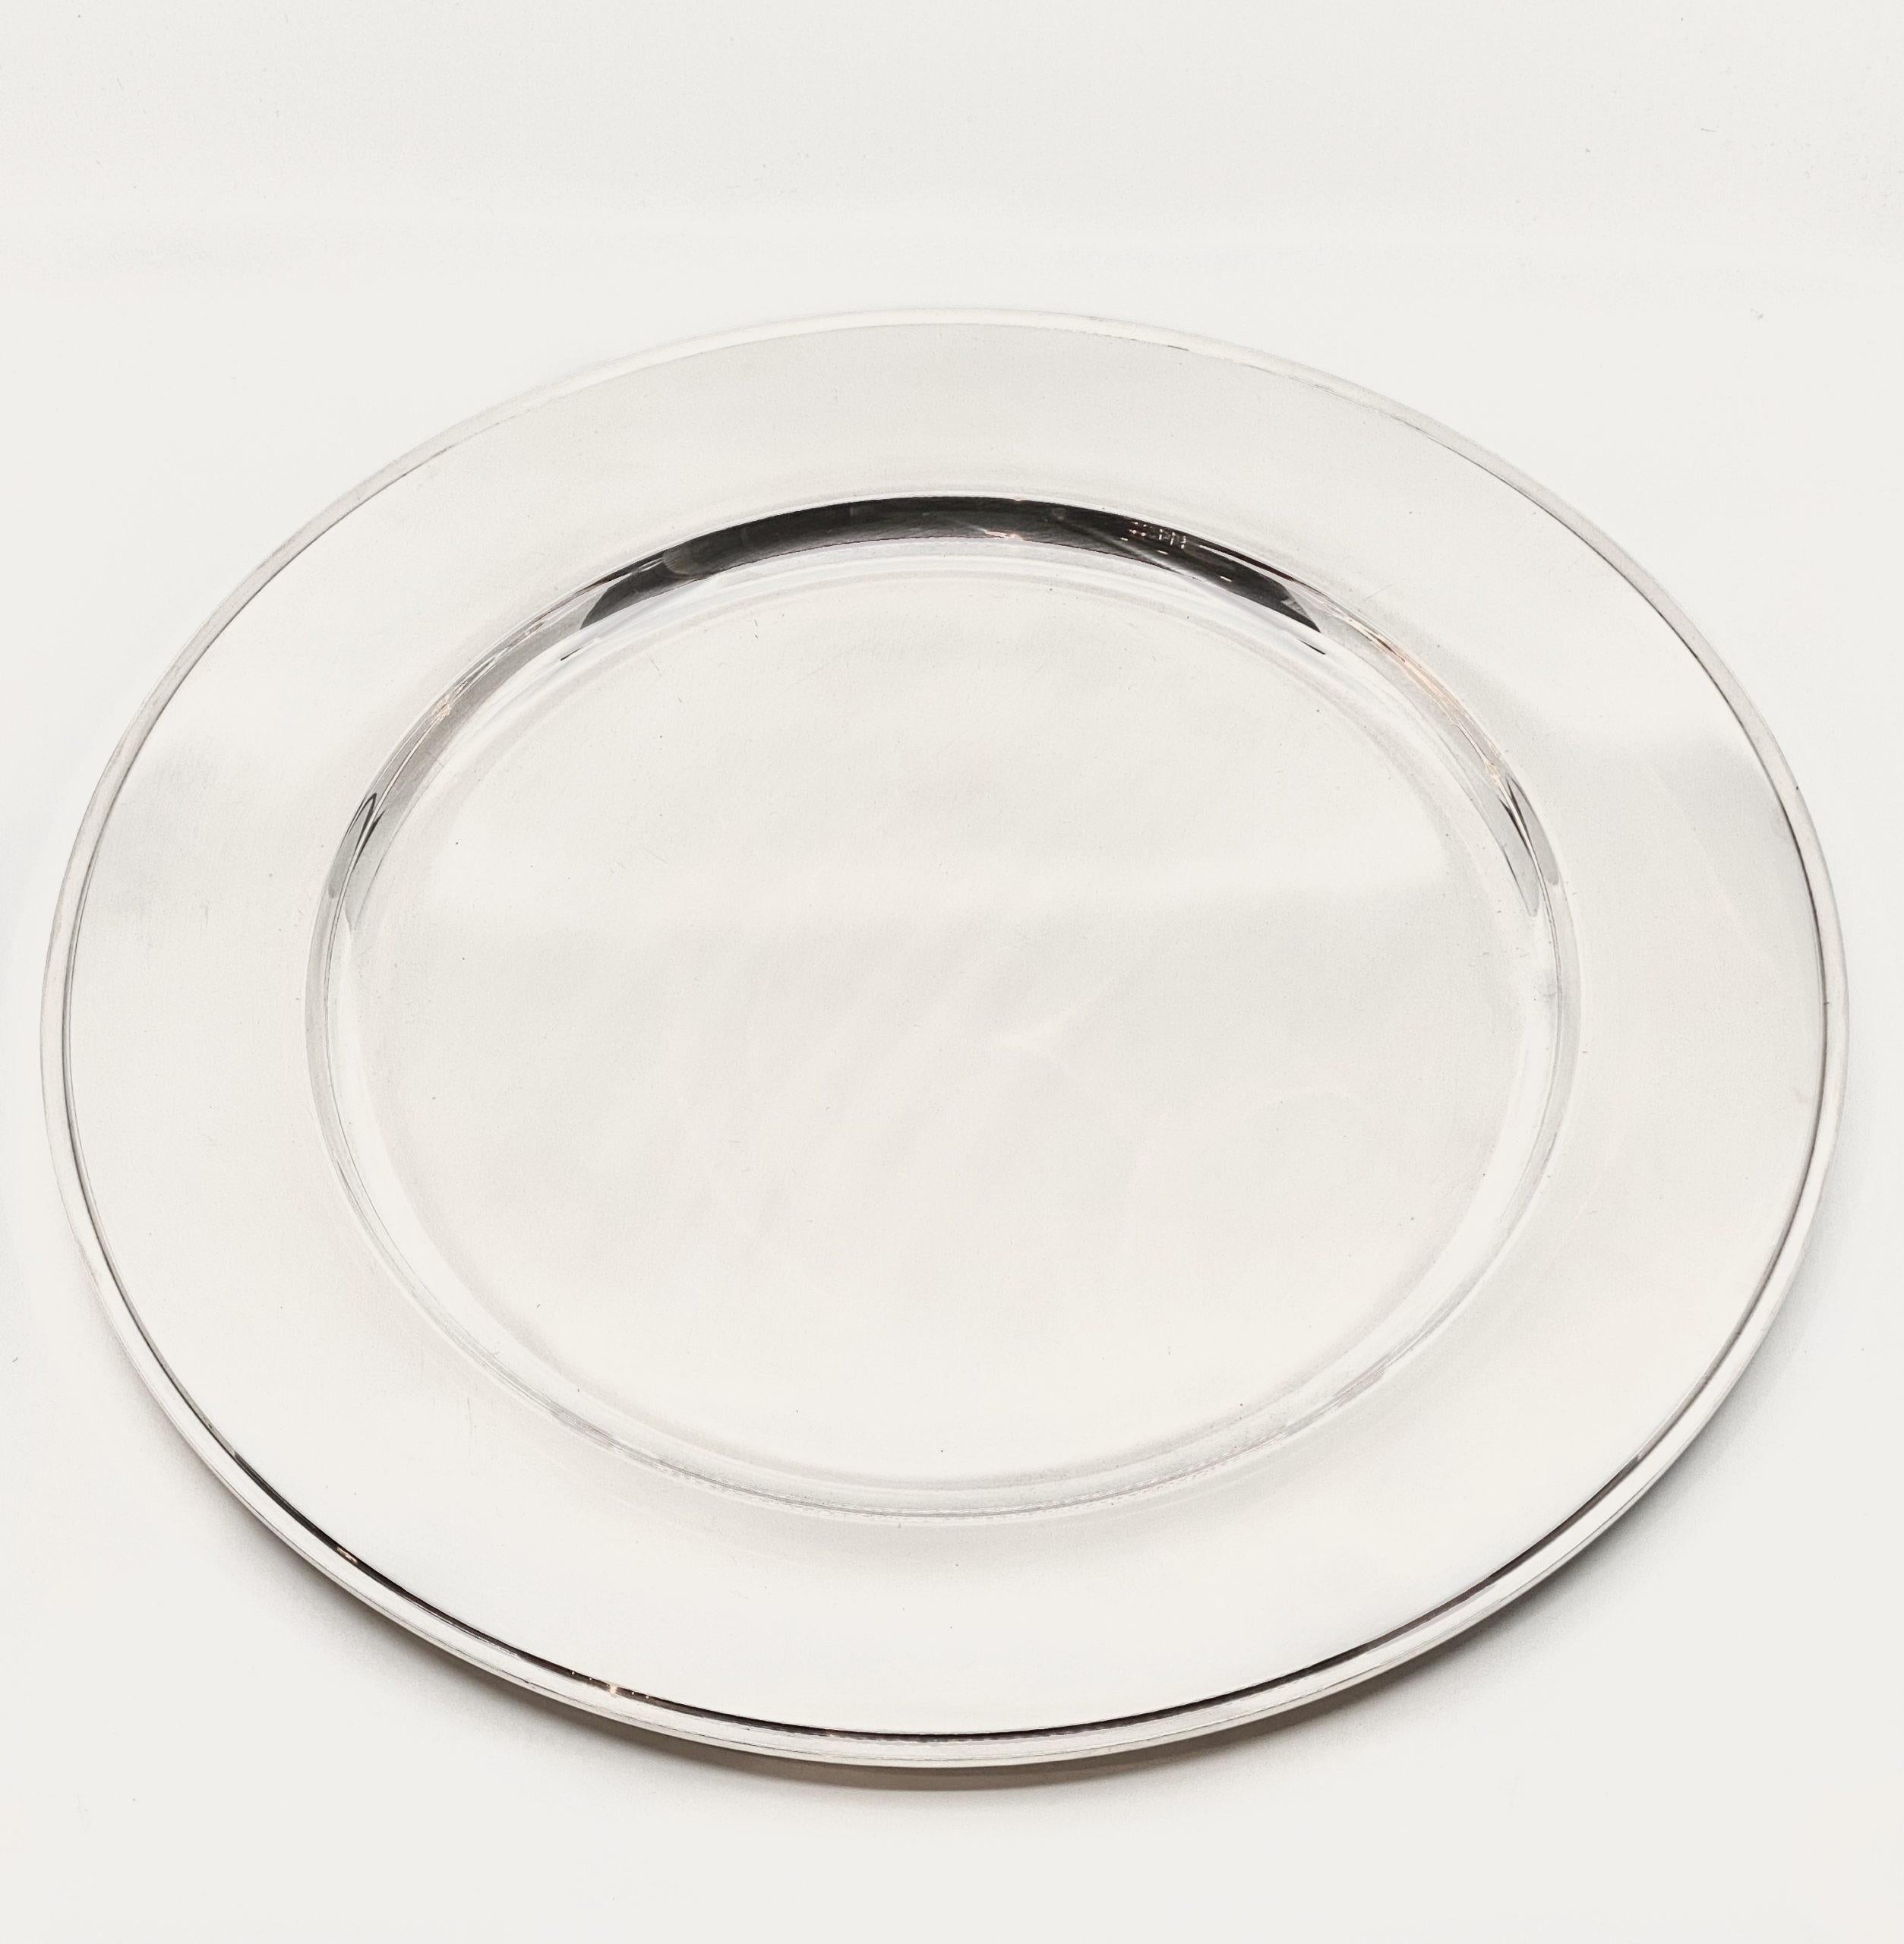 This is a sterling silver Georg Jensen serving platter in the Pyramid pattern, design #600M by Harald Nielsen from 1930.

Additional information:
Material: Sterling silver
Styles: Art Deco
Hallmarks: Georg Jensen hallmarks from